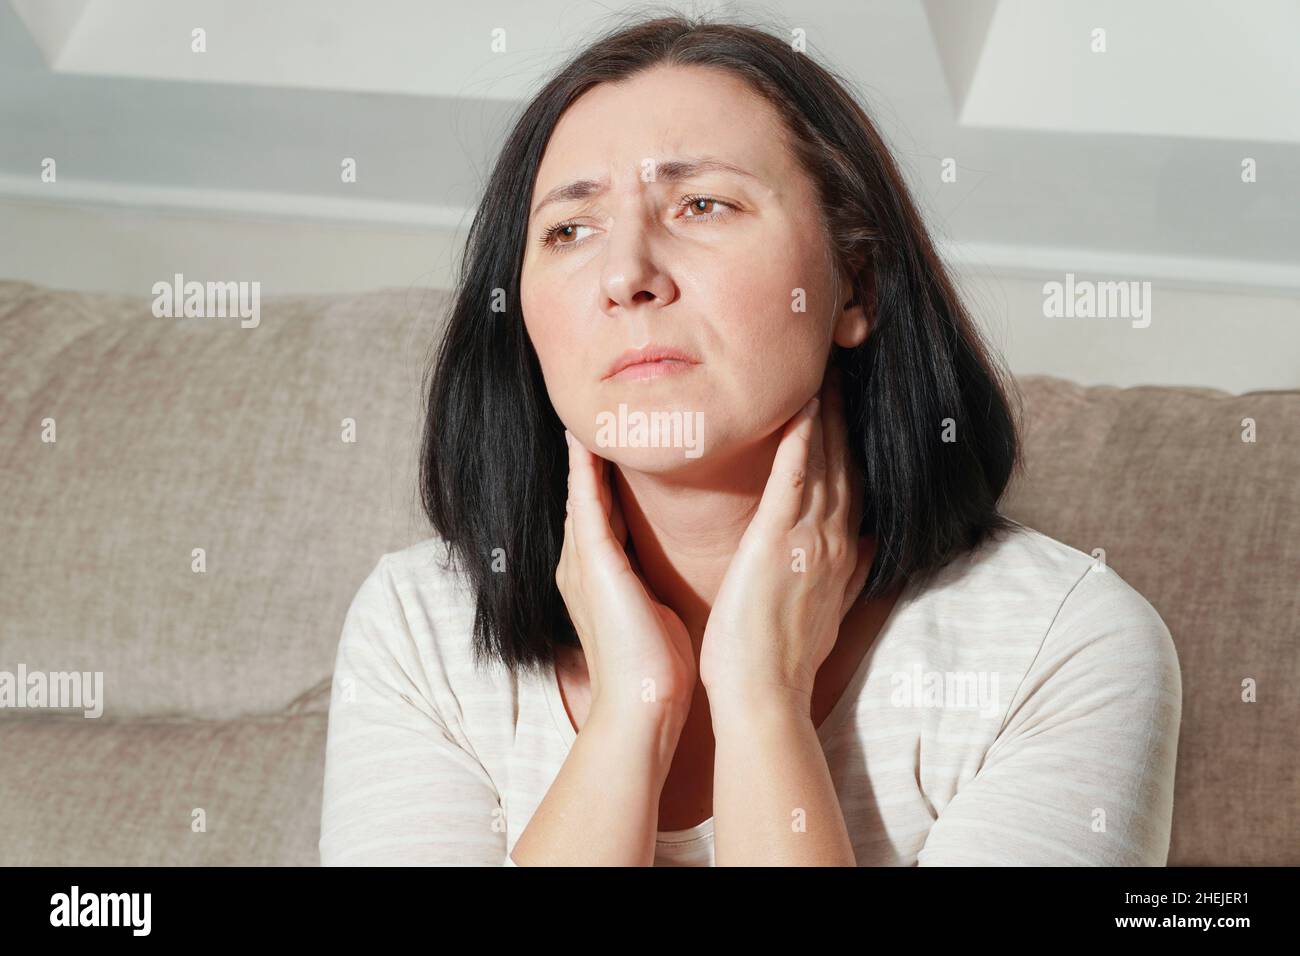 Mature woman touching her neck. Sick woman feels sore throat, painful cough, pharyngitis and hoarseness. Thyroid disorder. Medical and health care. Stock Photo